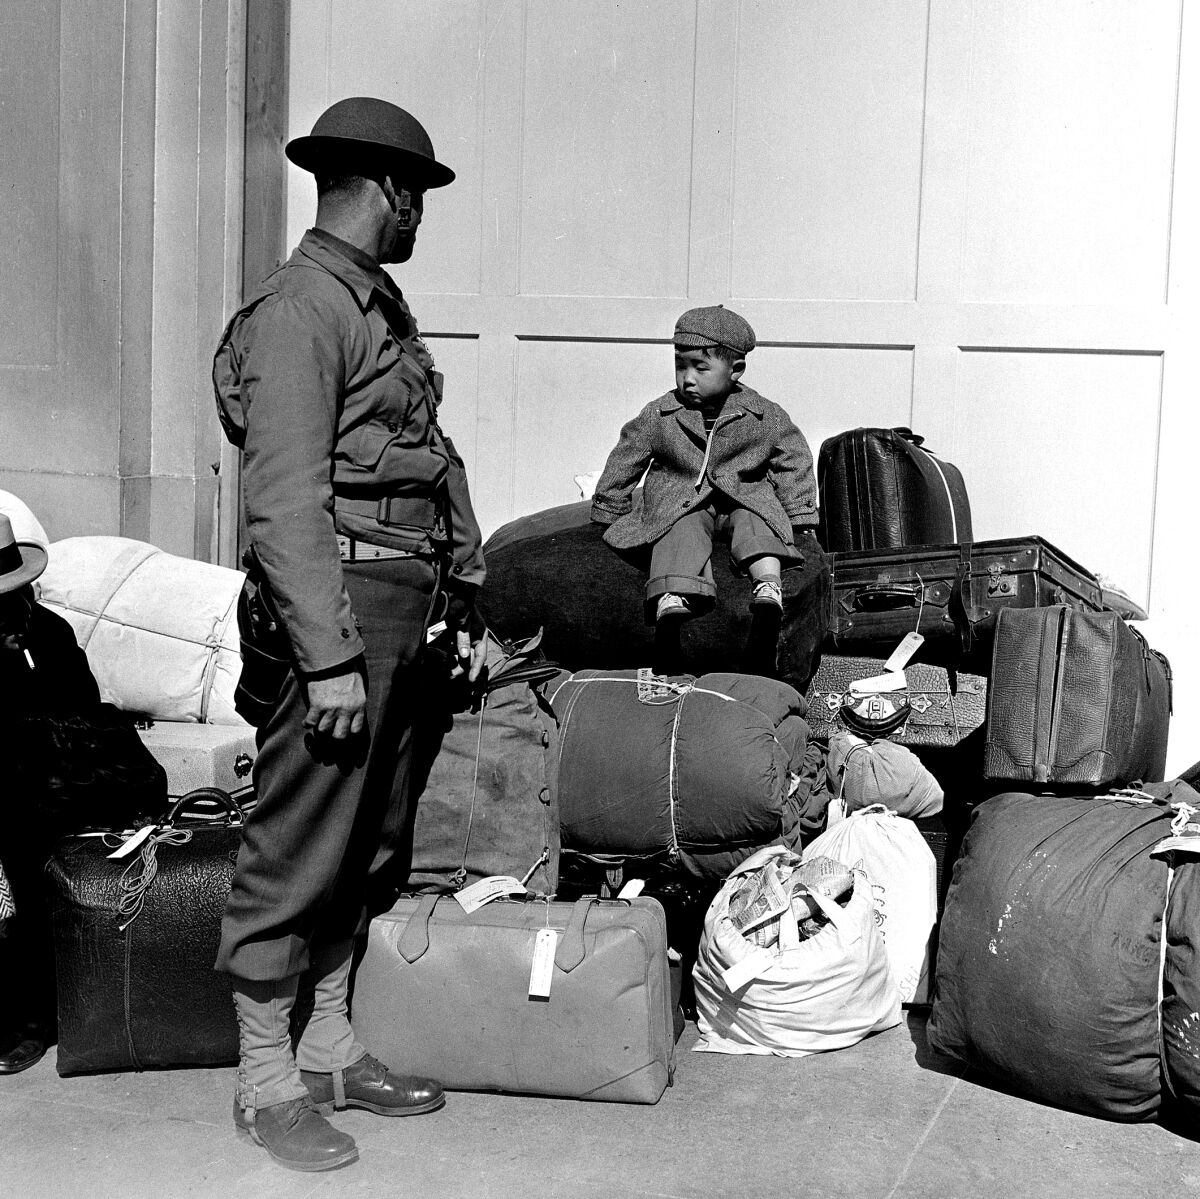 A boy sits on a pile of baggage as a military policeman watches him.